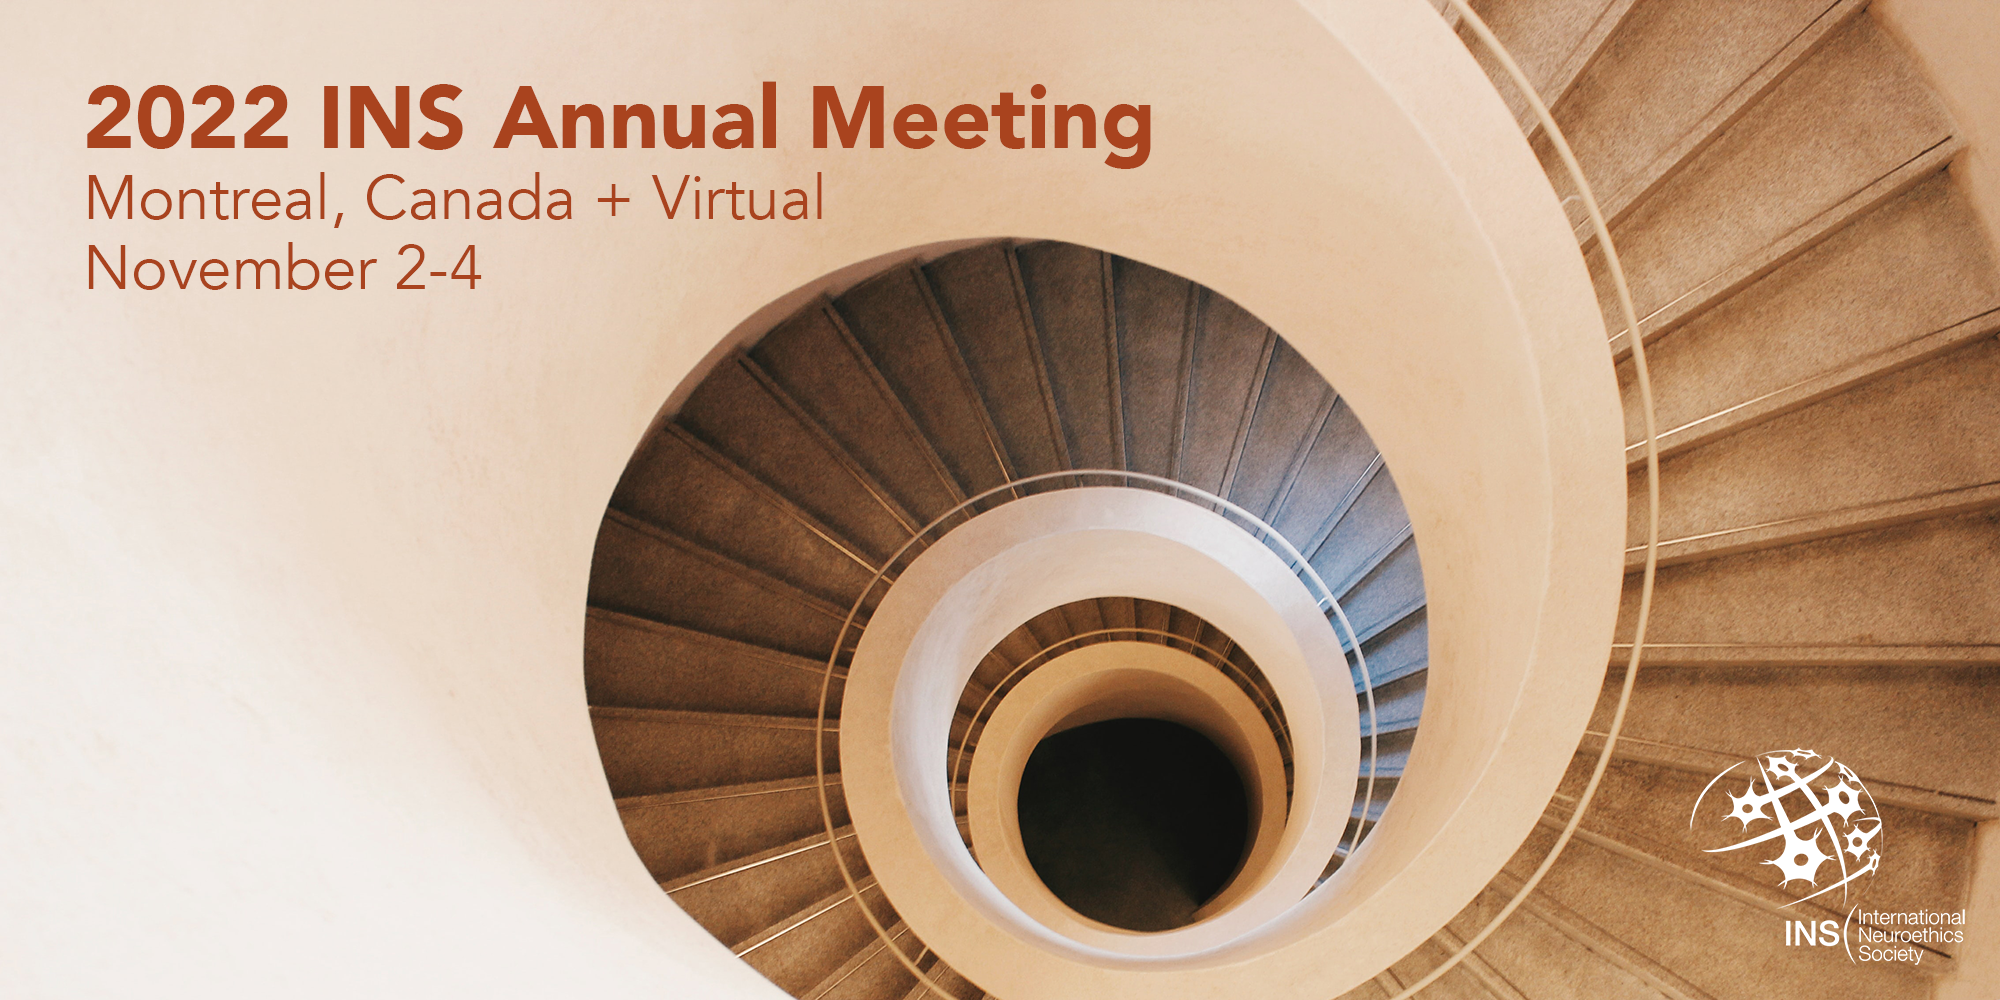 2022 INS Annual Meeting; Montreal, Canada + Virtual
November 2-4, 2022; Over spiral staircase from above theme image